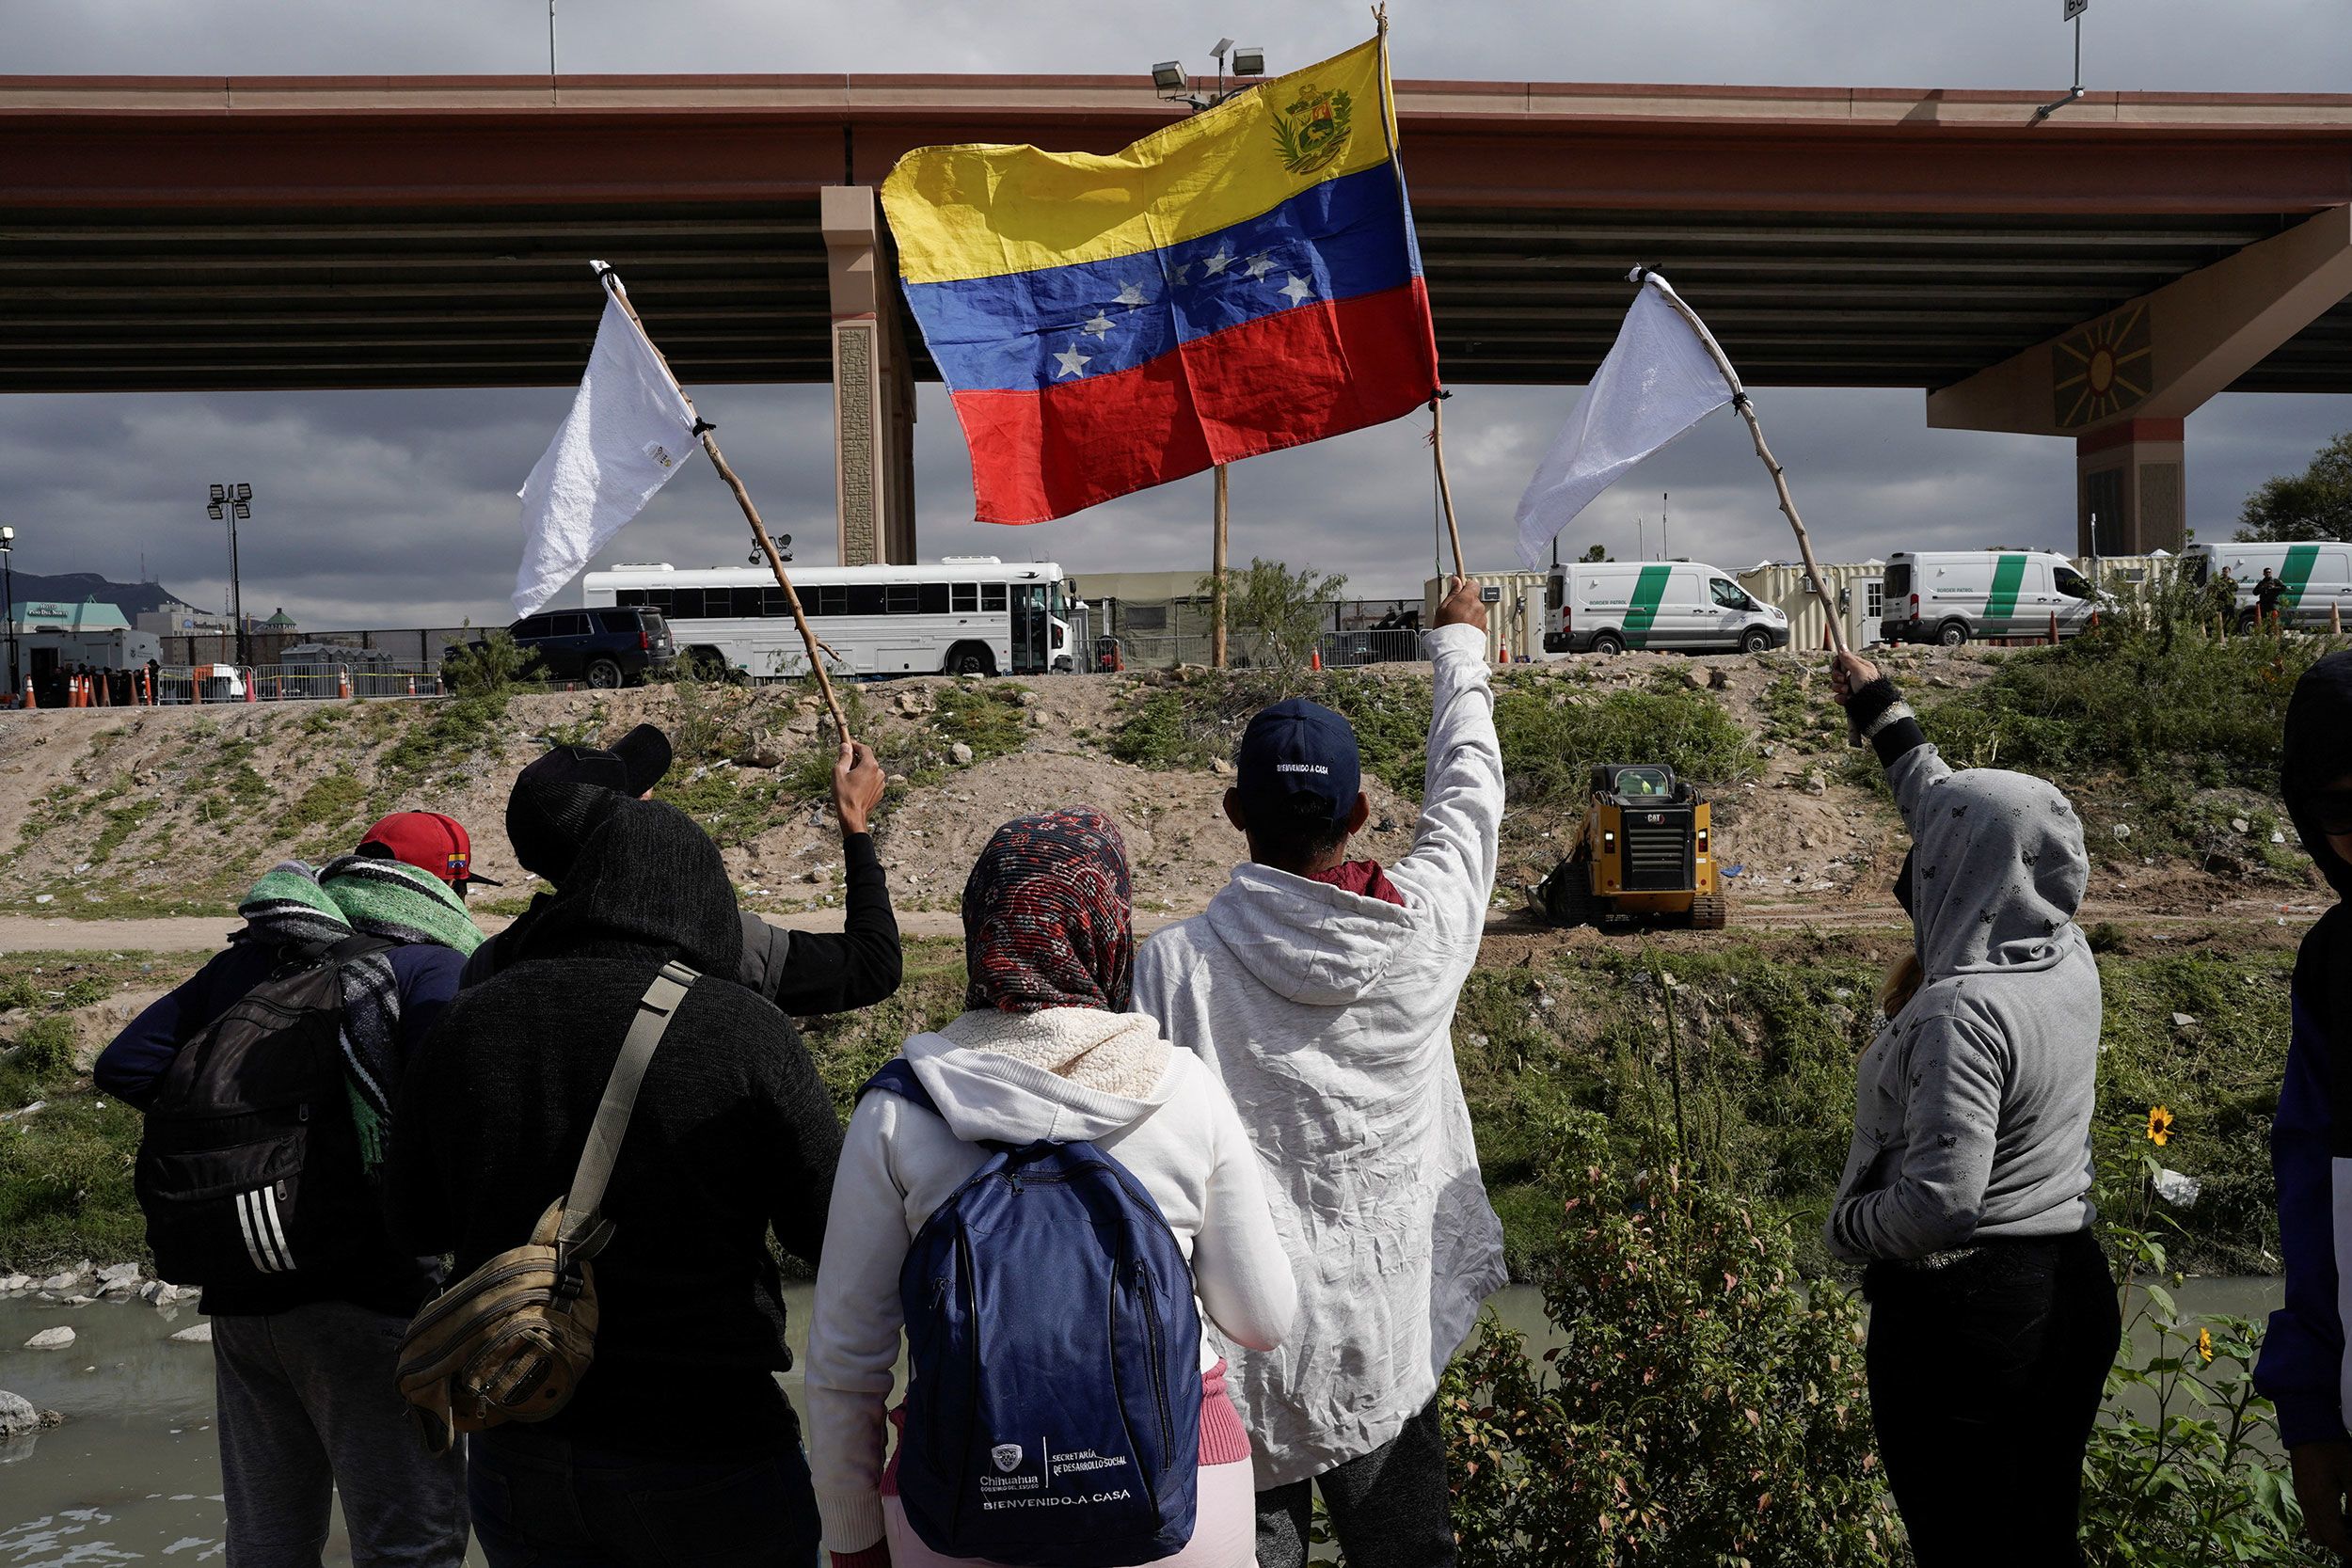 Hard Times in a Safe Haven: Protecting Venezuelan Migrants in Colombia